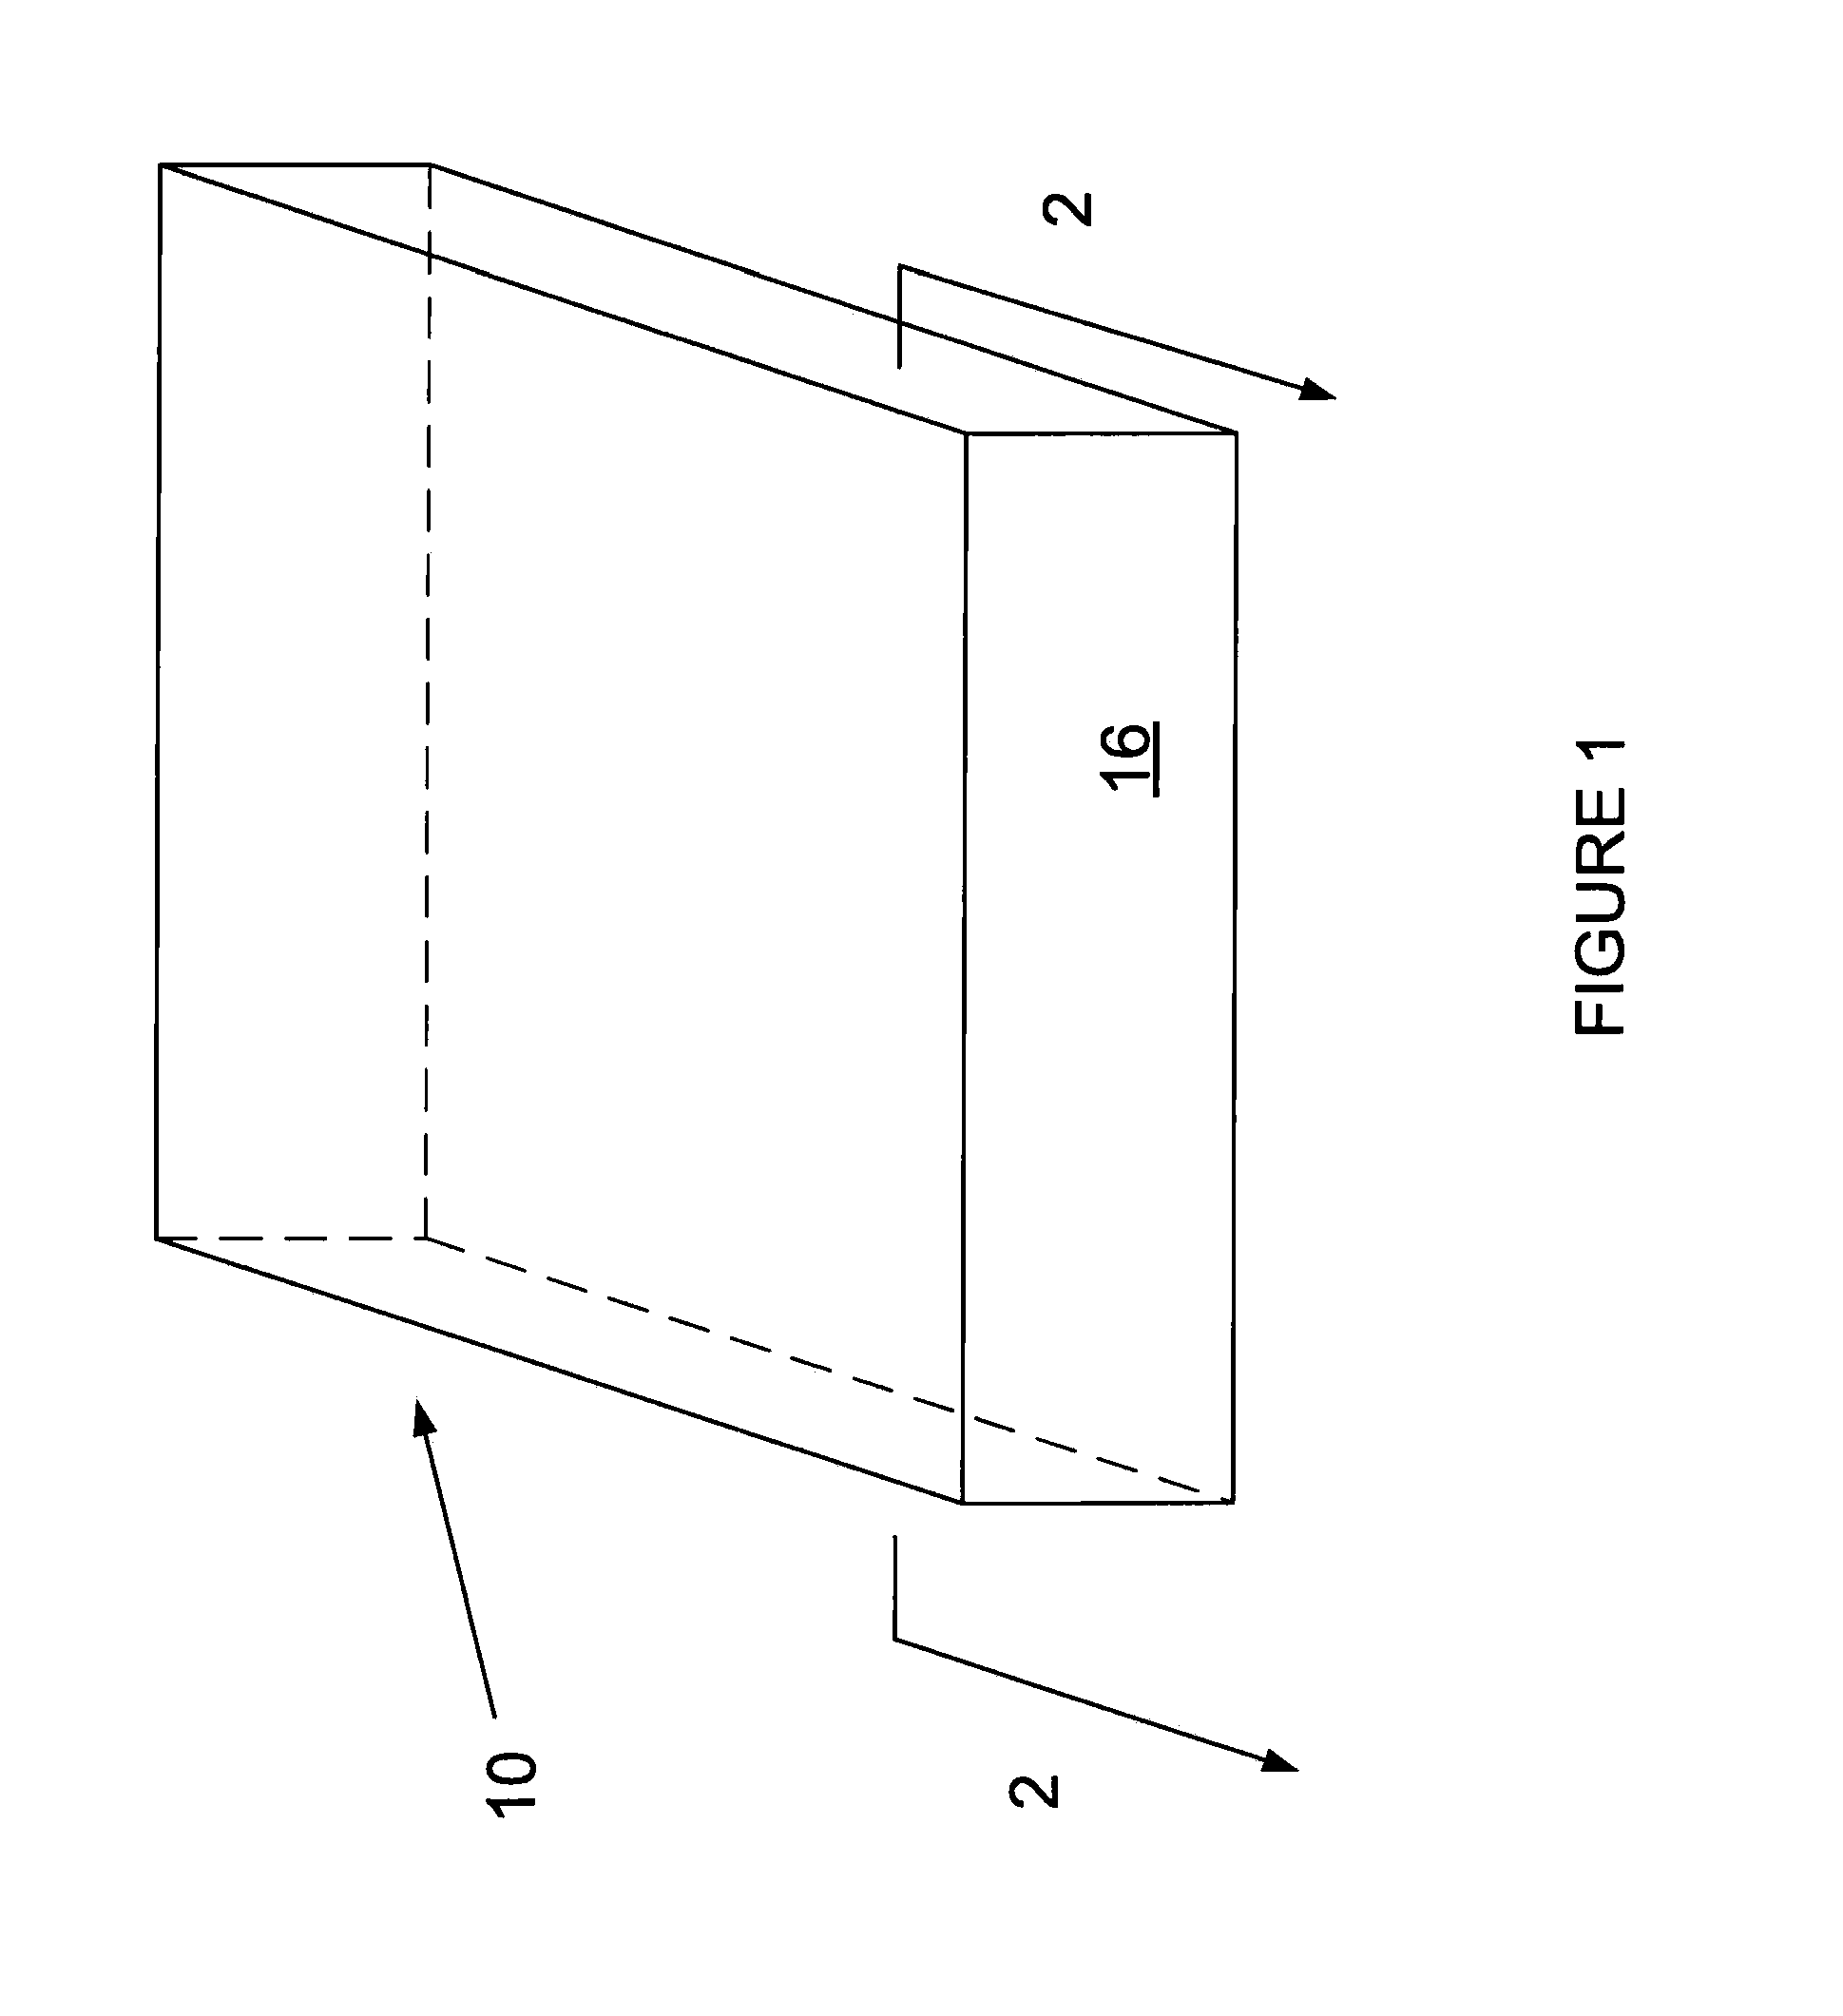 Soap with dispersed articles producing light and/or sound